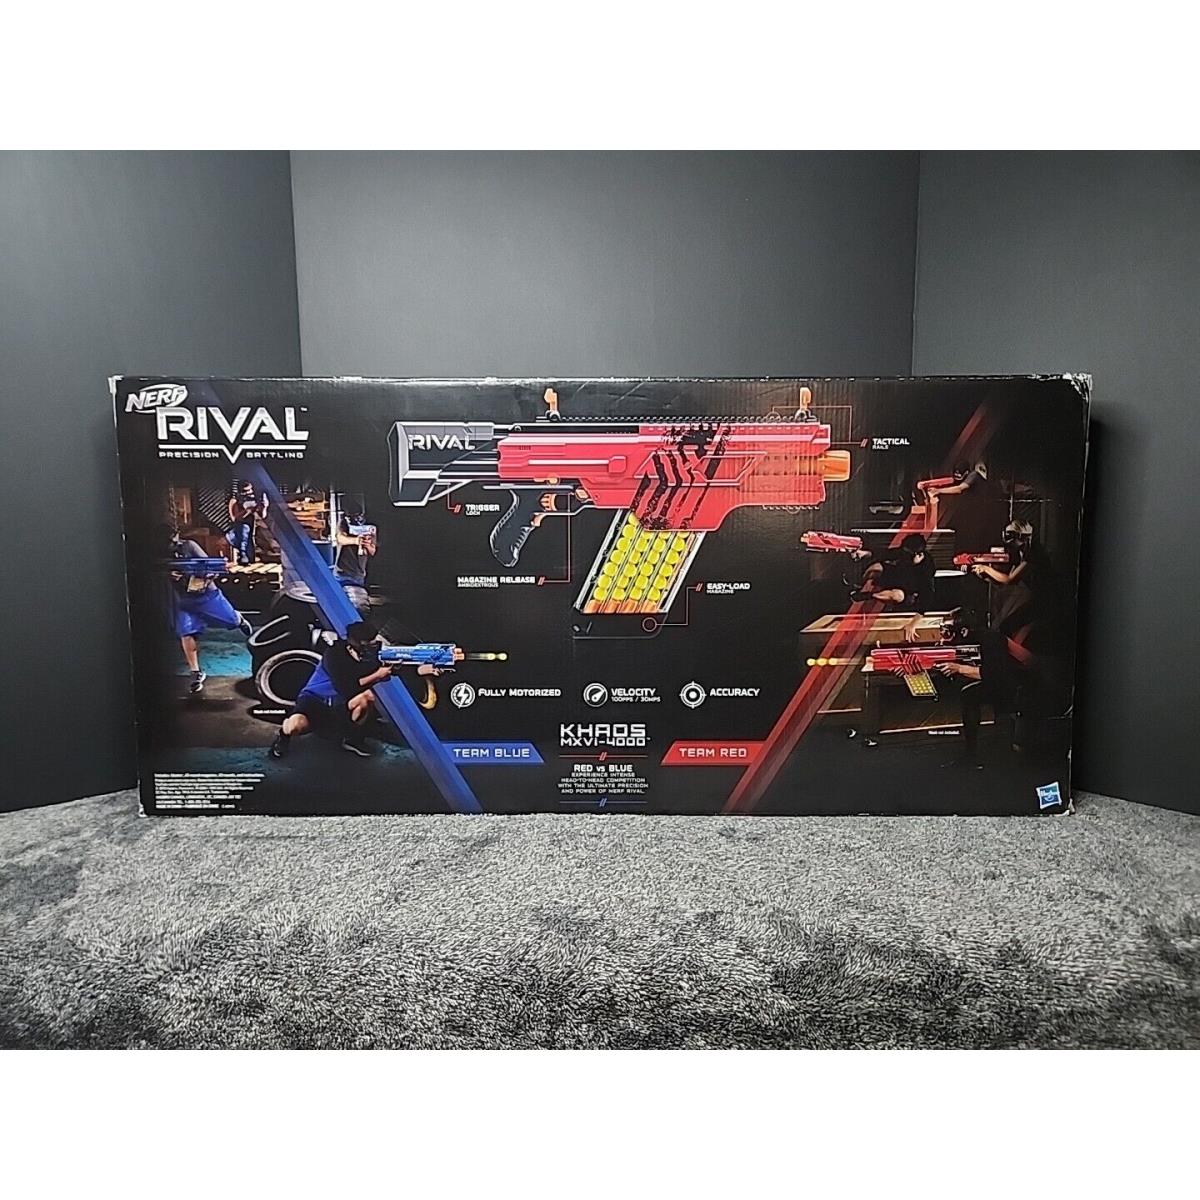 Nerf Rival Khaos MXVI-4000 Team Red 40x Rounds